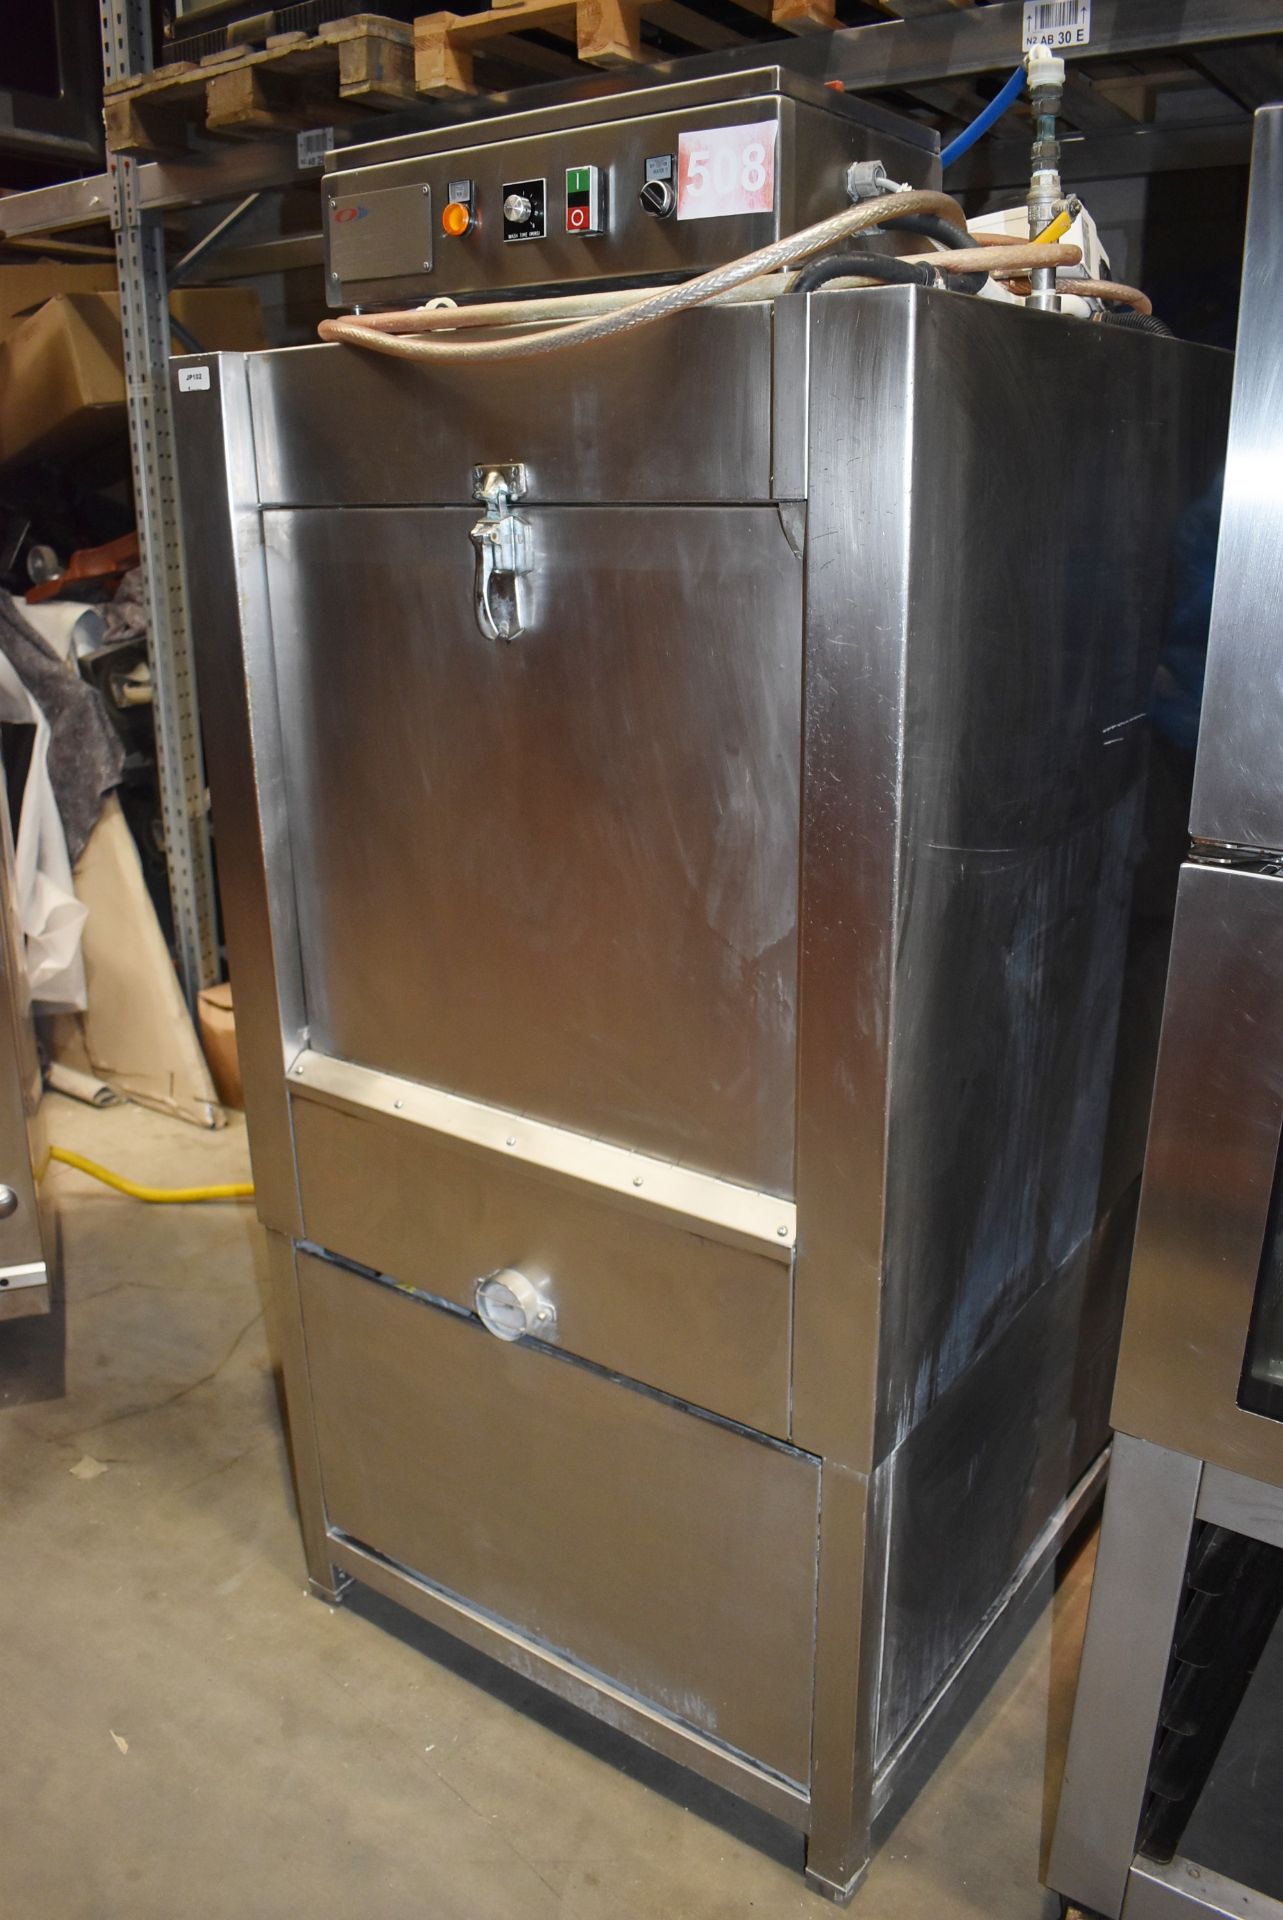 1 x Oliver Douglas Panamatic 500 Industrial Washing Machine For Commercial Kitchen Environments - St - Image 5 of 15